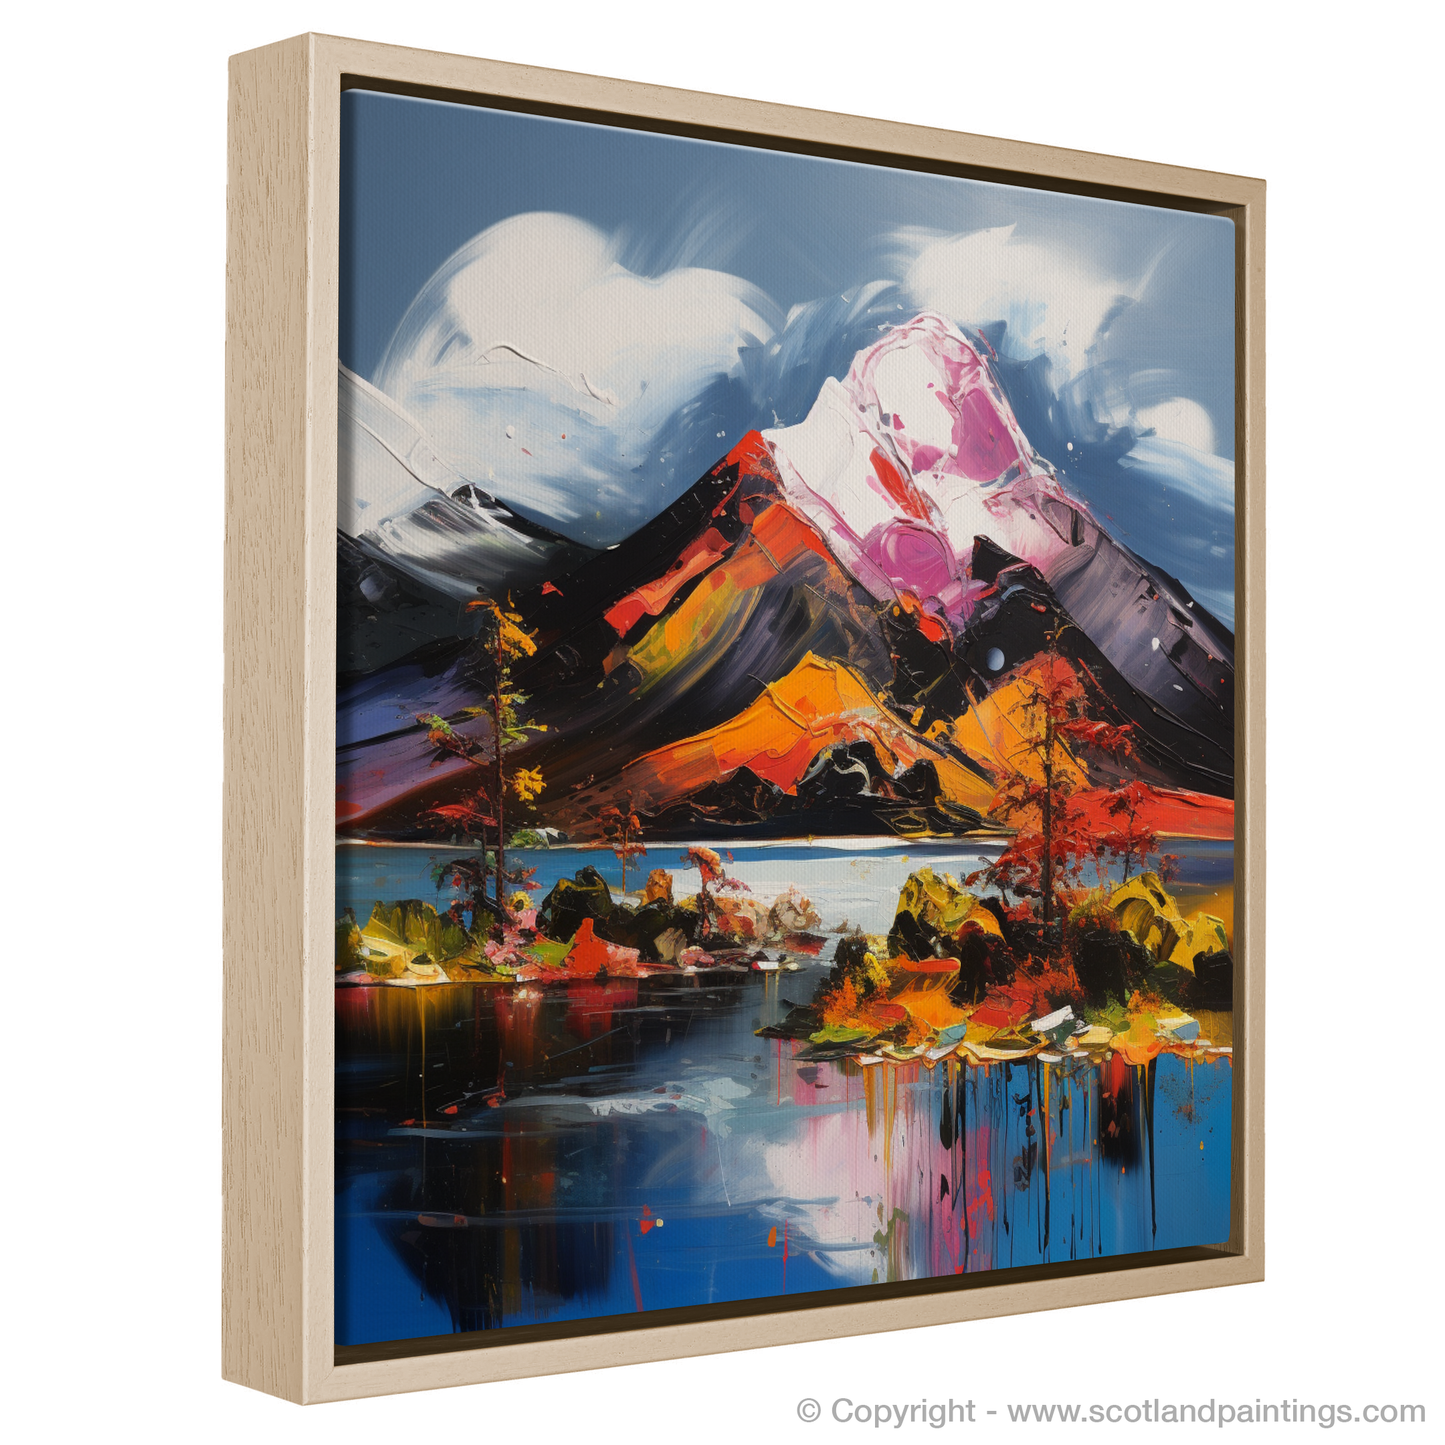 Painting and Art Print of Ben Lomond entitled "Ben Lomond in Expressionist Verve".